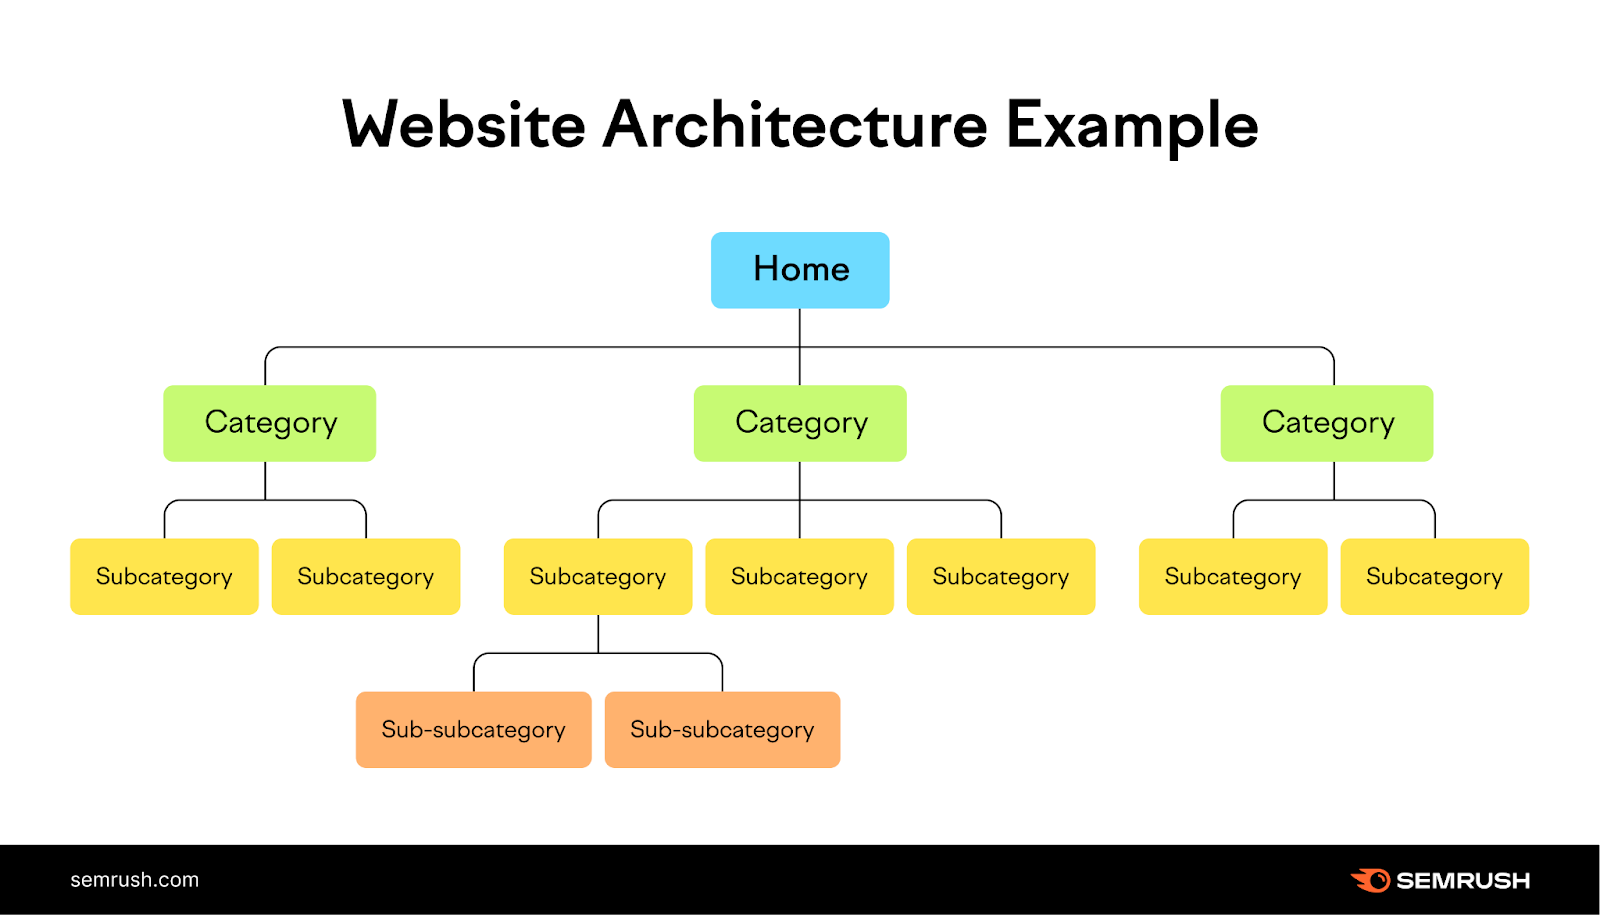 Website Architecture Example showing categories and subcategories tree